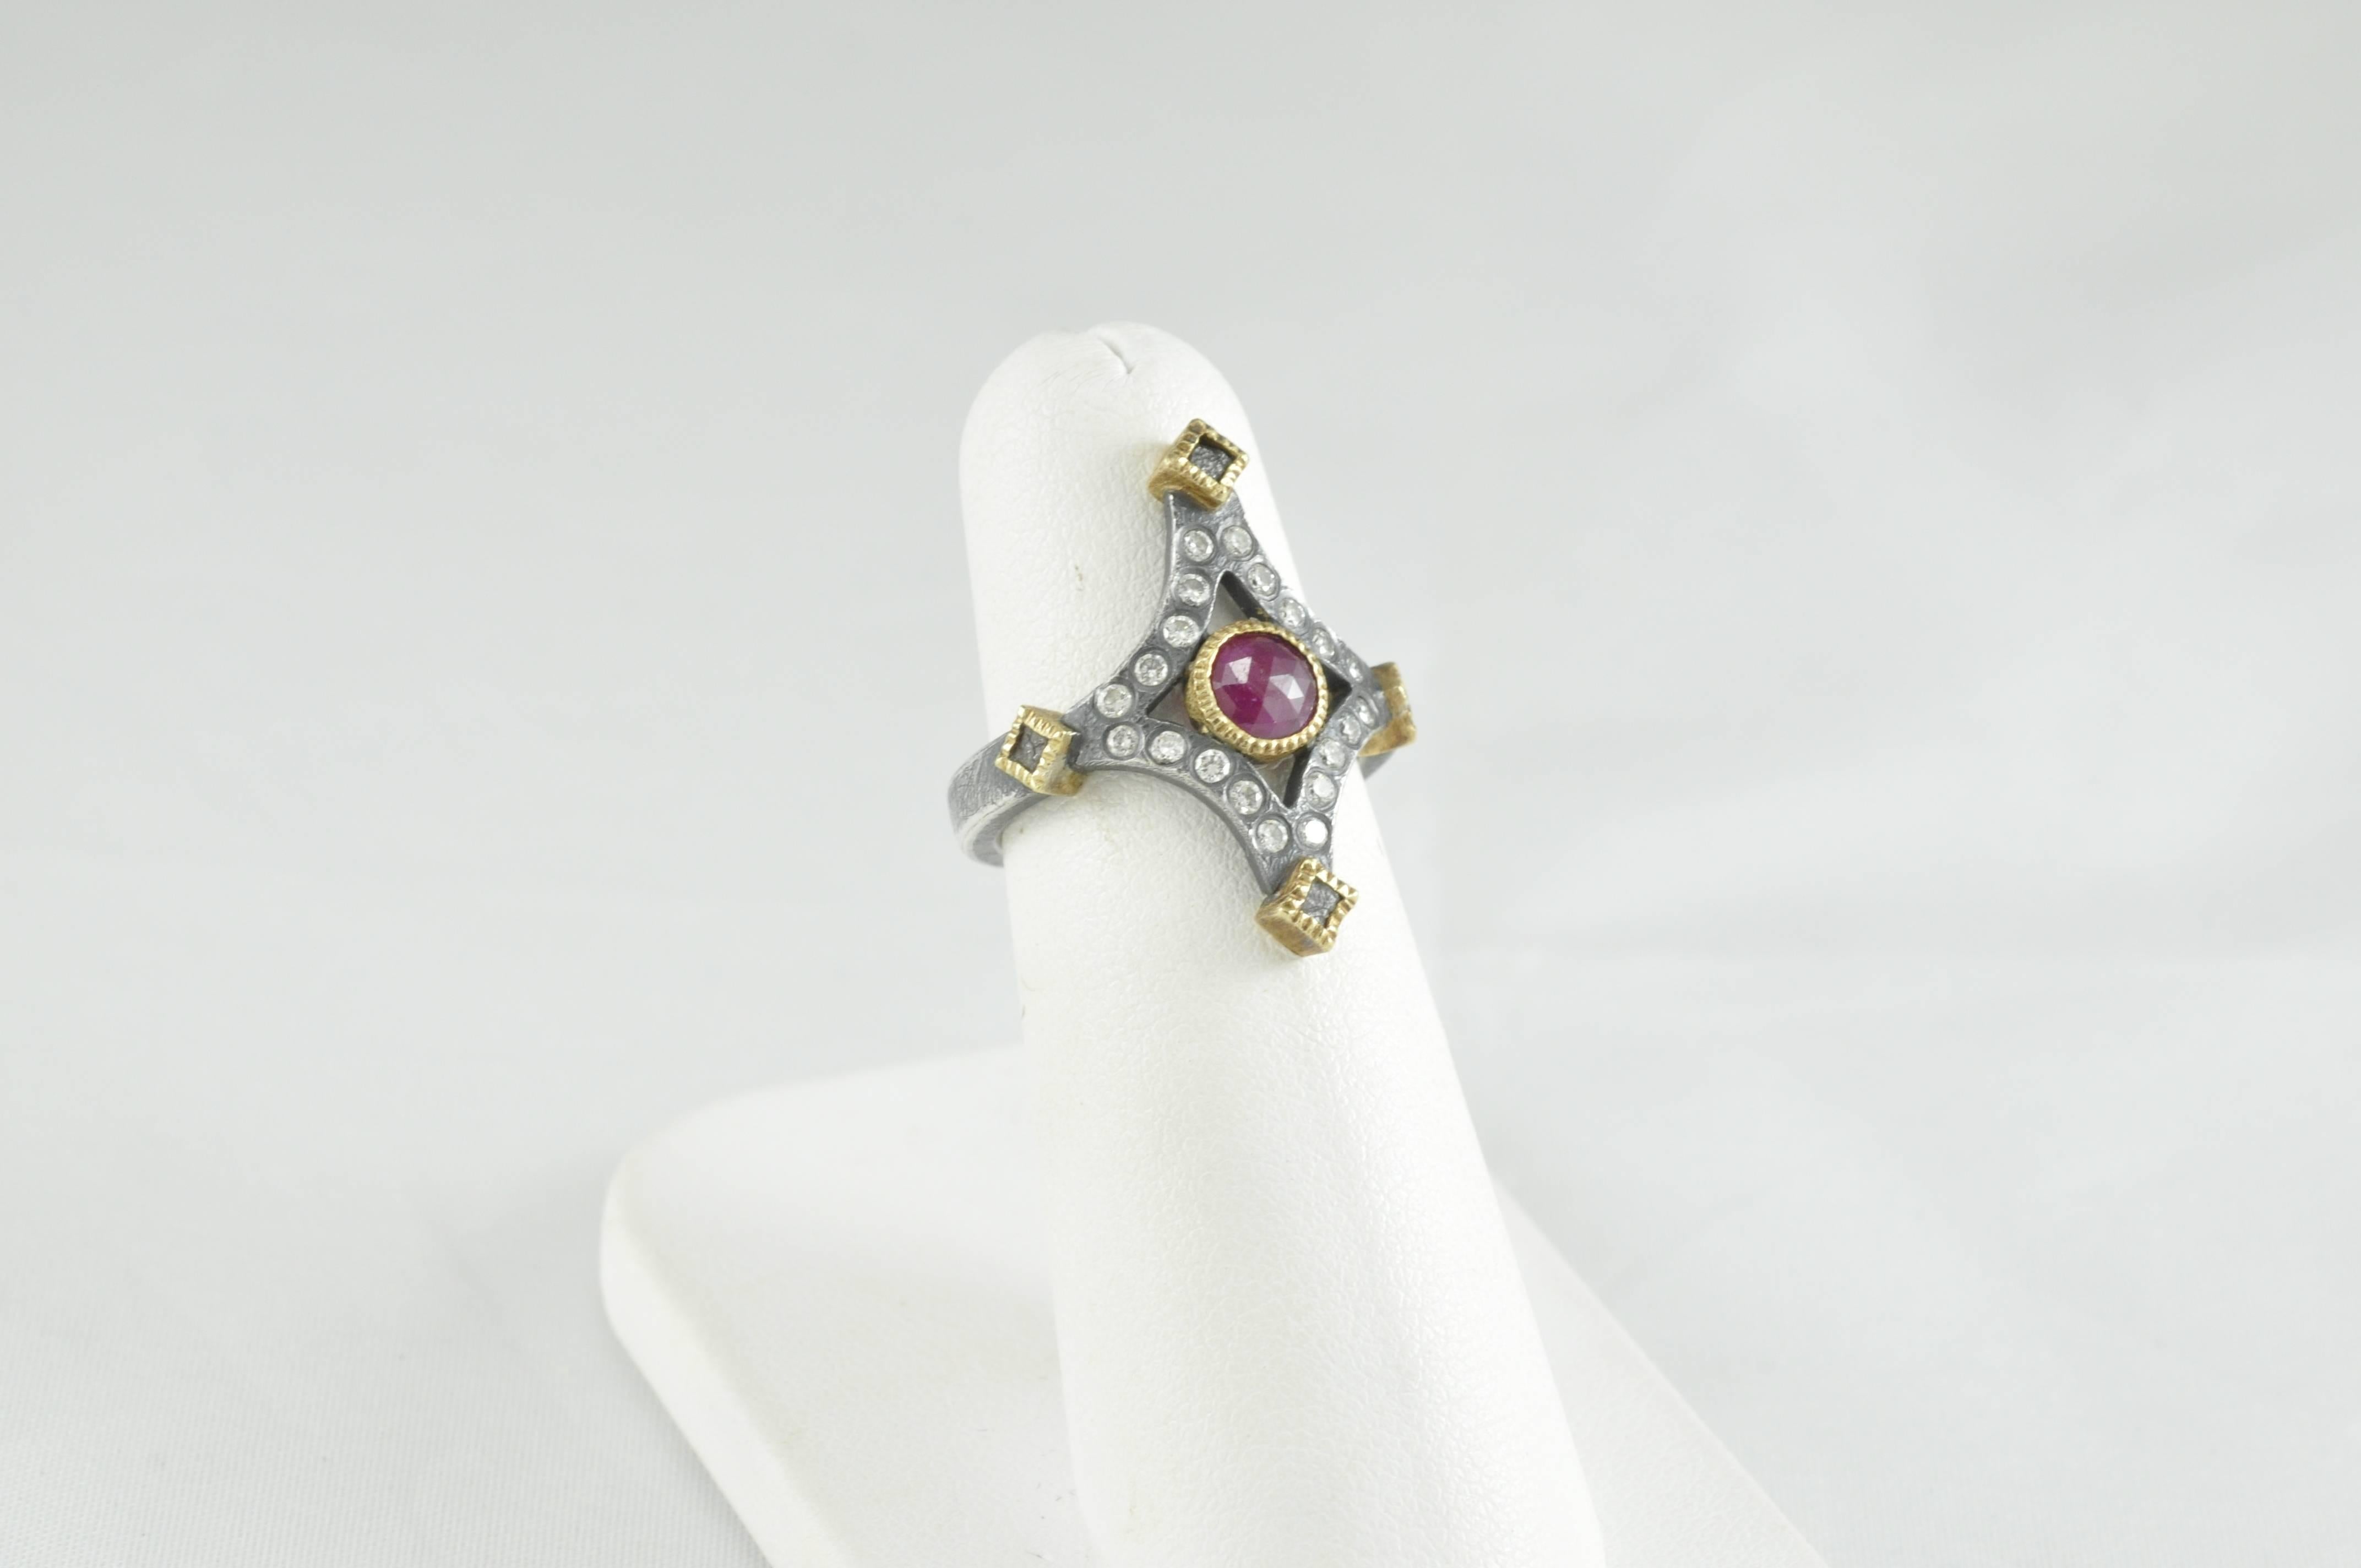 Model Number tdr801-ruby.

18k Yellow Gold, Sterling Silver with patina Ring.   
Ruby-.33ctw.  White Brilliant Cut Diamonds .3ctw, Raw diamonds .4ctw.  Hand Forged and Fabricated.  20 each 1.8mm round Diamonds and 4 each raw diamonds. 
Finger size 4